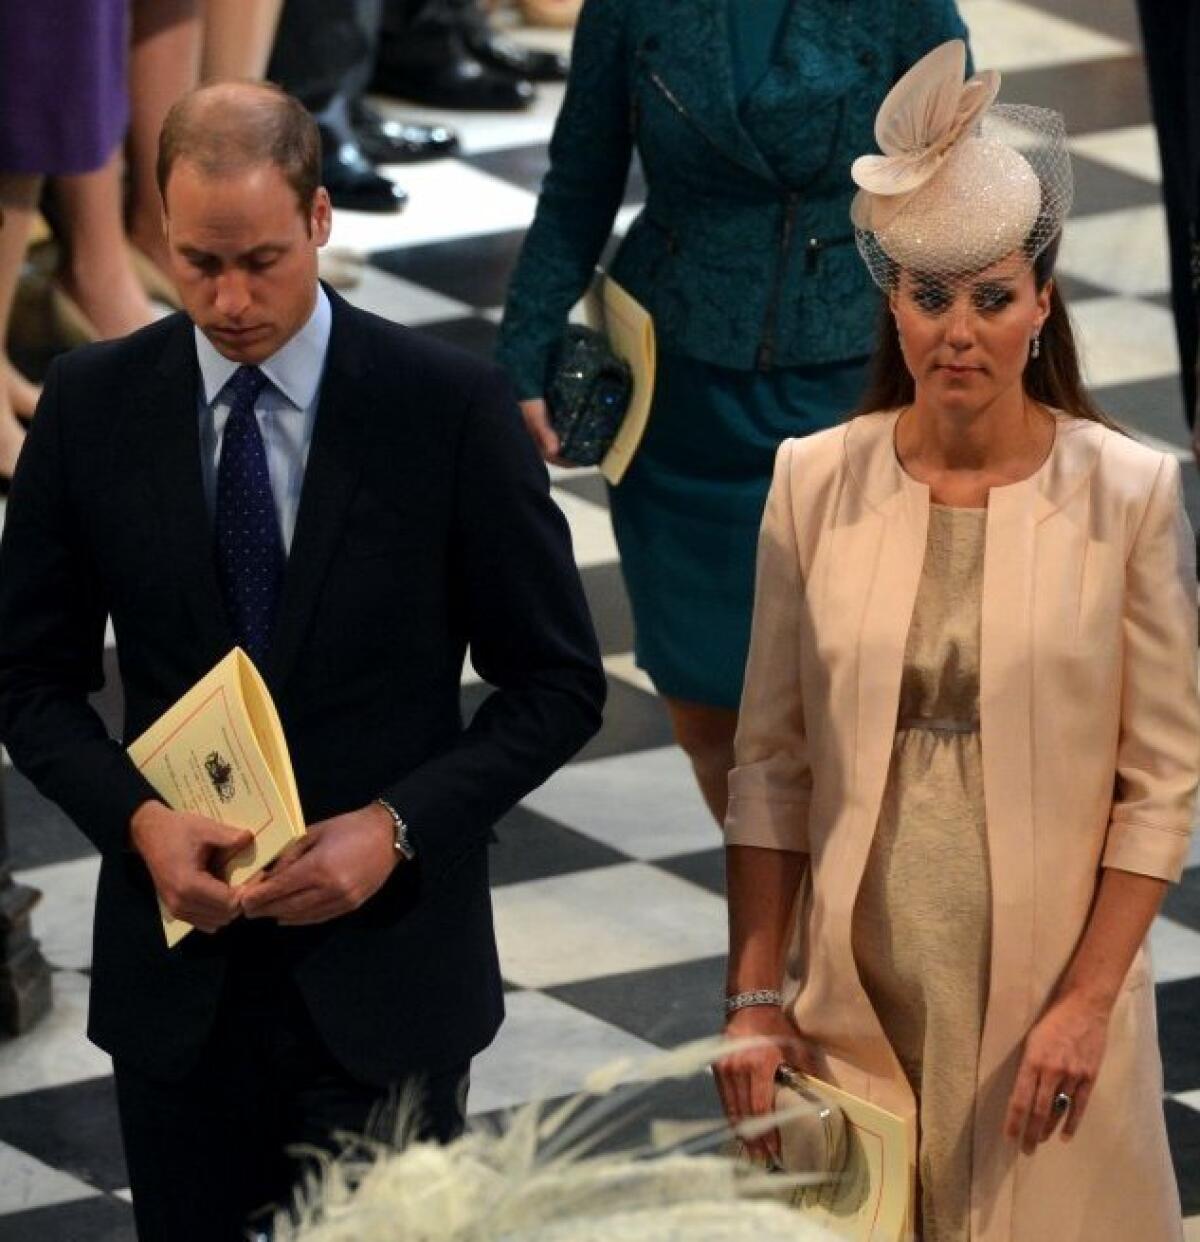 The Duke and Duchess of Cambridge attend a service June 4 at Westminster Abbey in London to celebrate the 60th anniversary of the coronation of Britain's Queen Elizabeth II. The duchess is to christen a new ship on Thursday in Southampton, England.